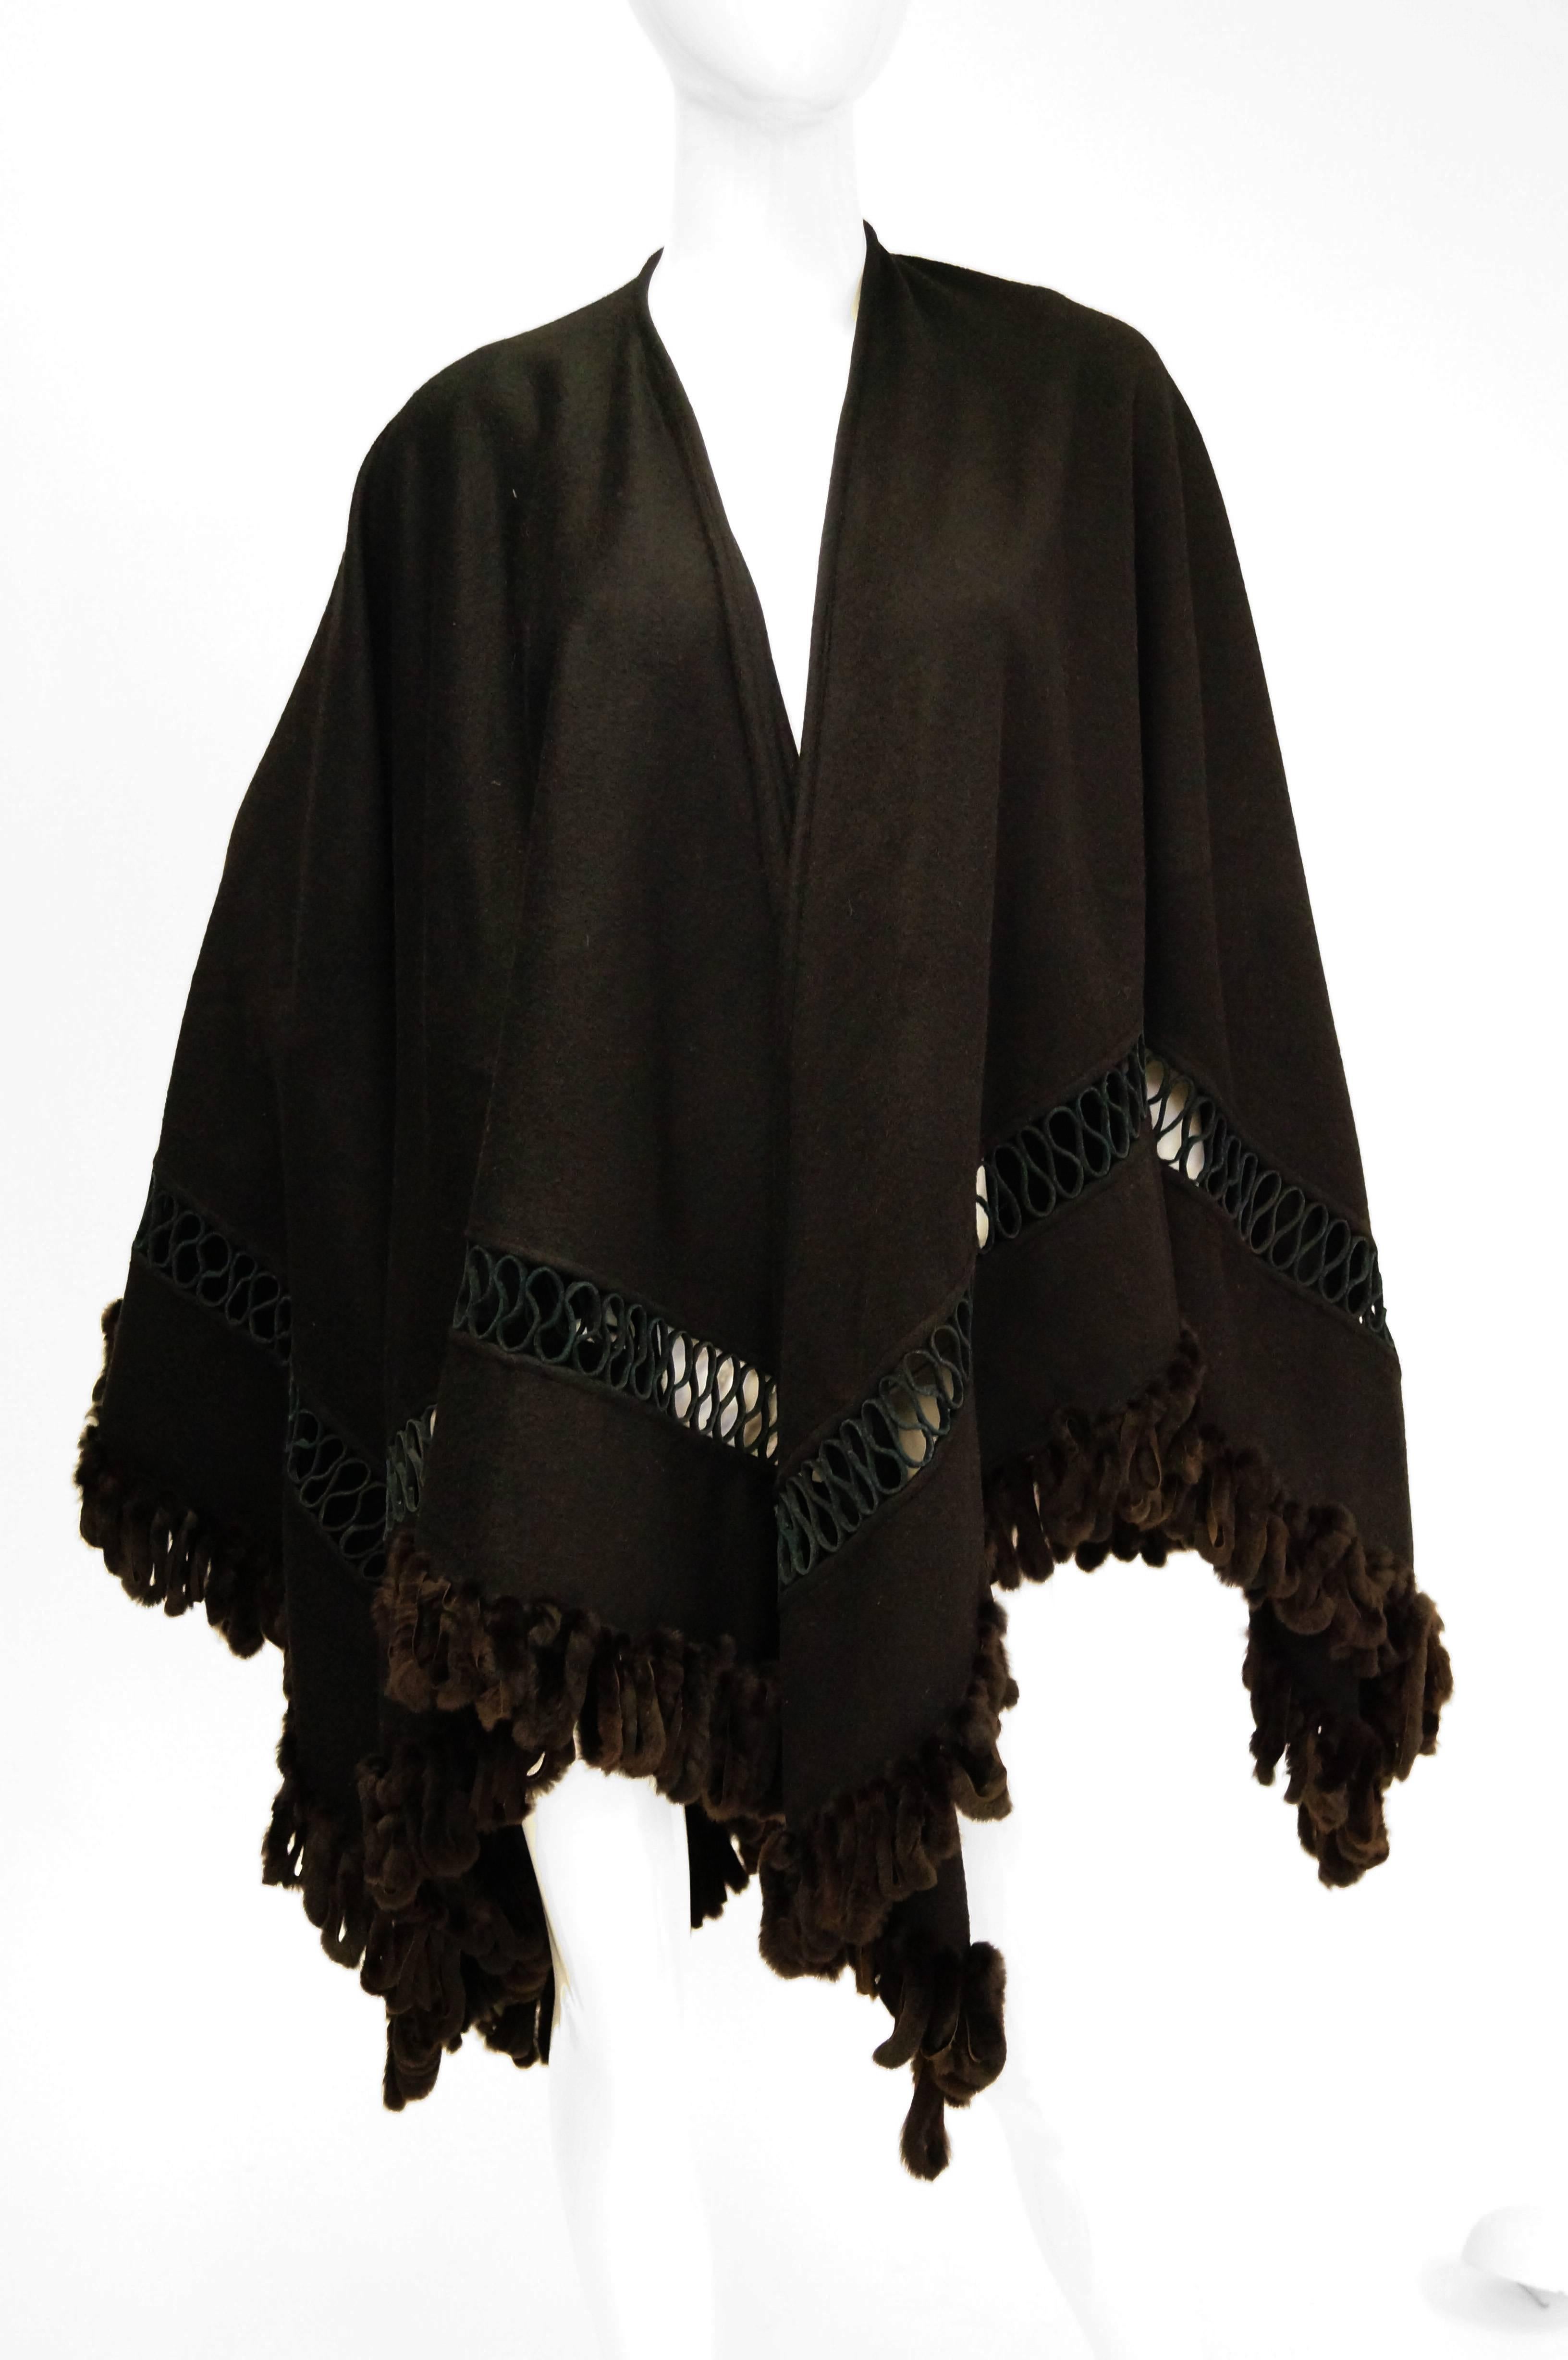 Fabulous intricate wool and fur shawl by Adrienne Landau. This solid black shawl by Adrienne Landau is diamond cut with a straight center line up to the neck. The shawl is made of a medium-weight wool that is weighed down with a fox fur tassel trim.